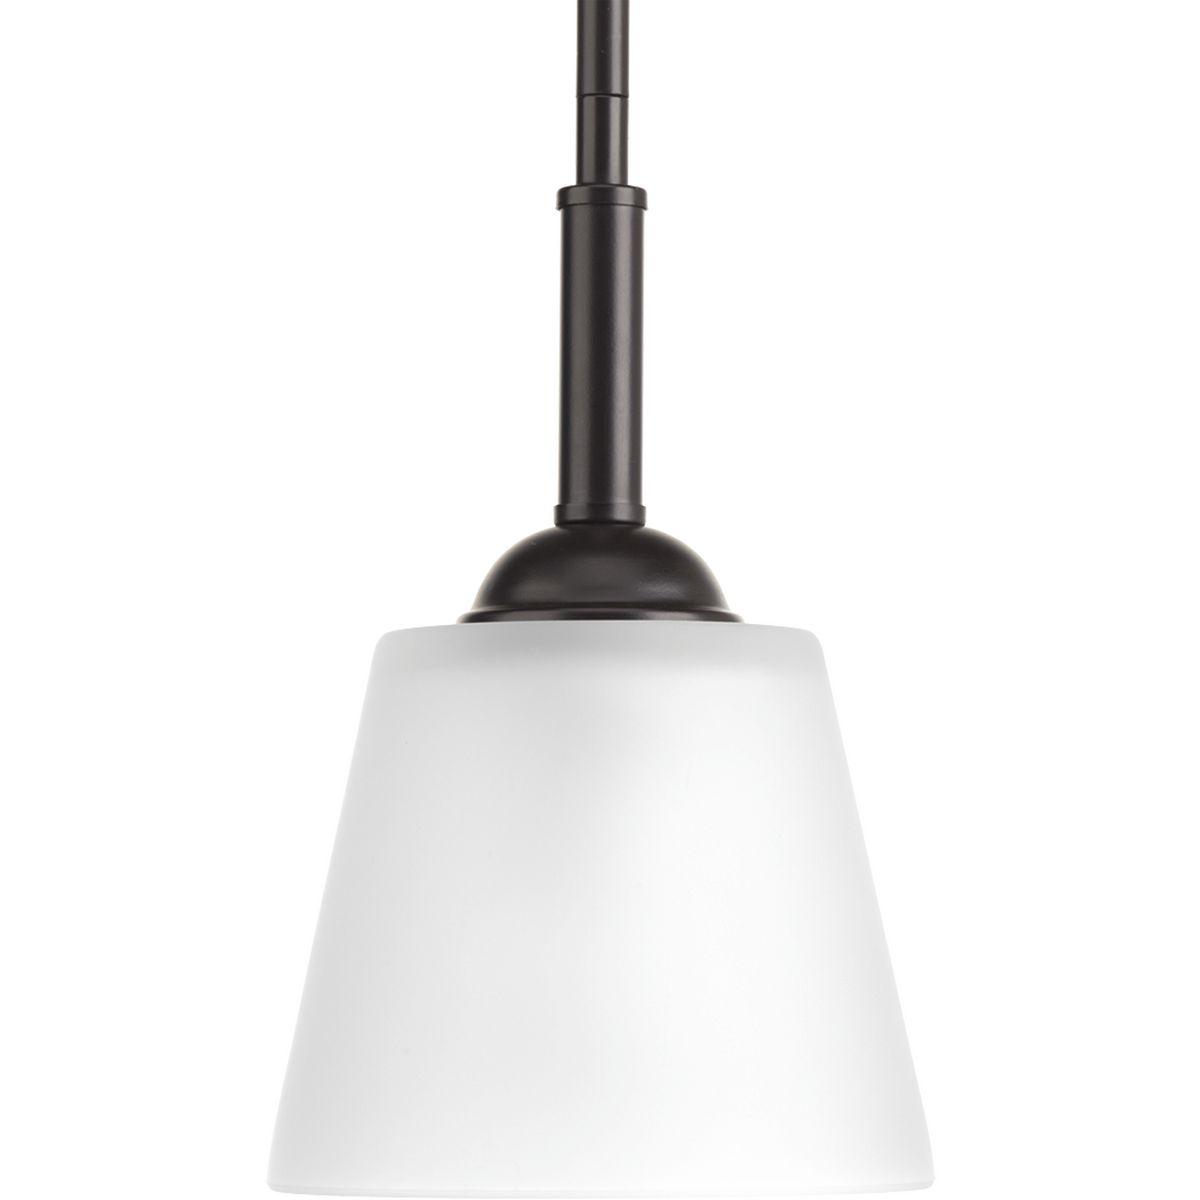 Hubbell P5092-20 The one-light mini-pendant from the Arden collection offers a comfortable silhouette that is both rustic and modern. A substantial stem suspends etched glass. This transitional style fixture is finished in Antique Bronze.  ; Rustic and modern styling. ; F